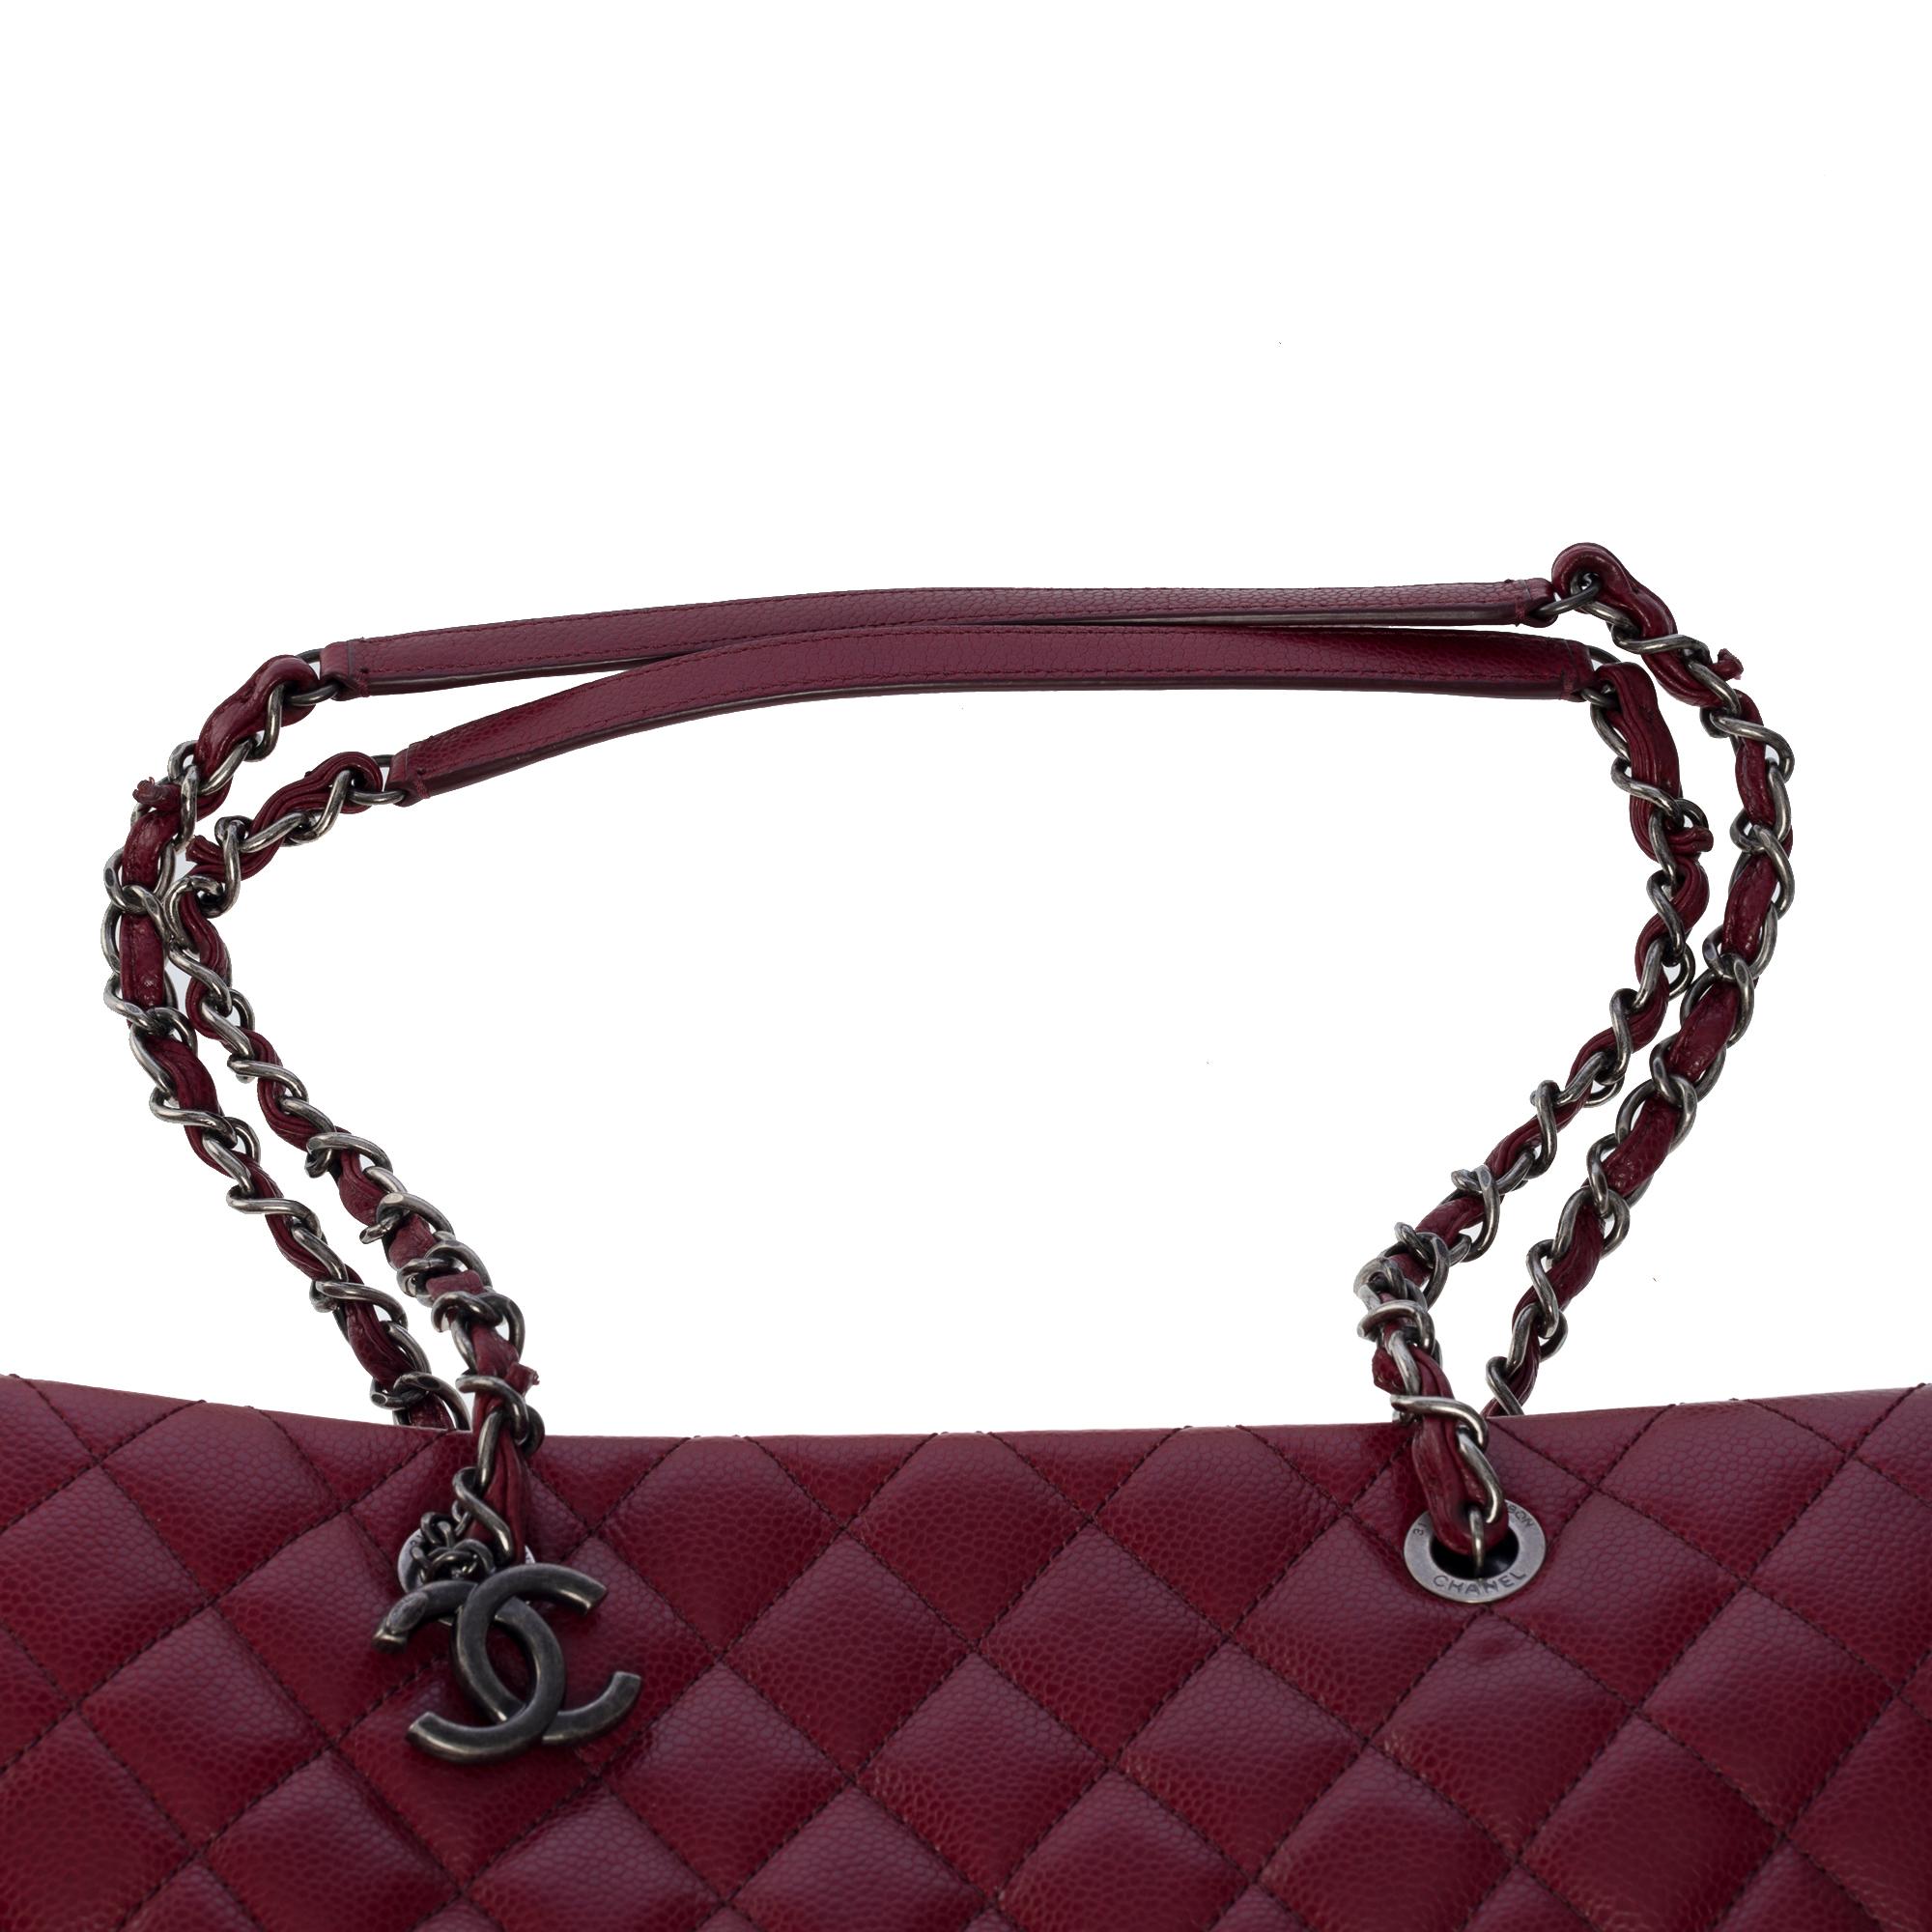 Amazing Chanel Shopping Tote bag in Burgundy Caviar quilted leather, SHW 5